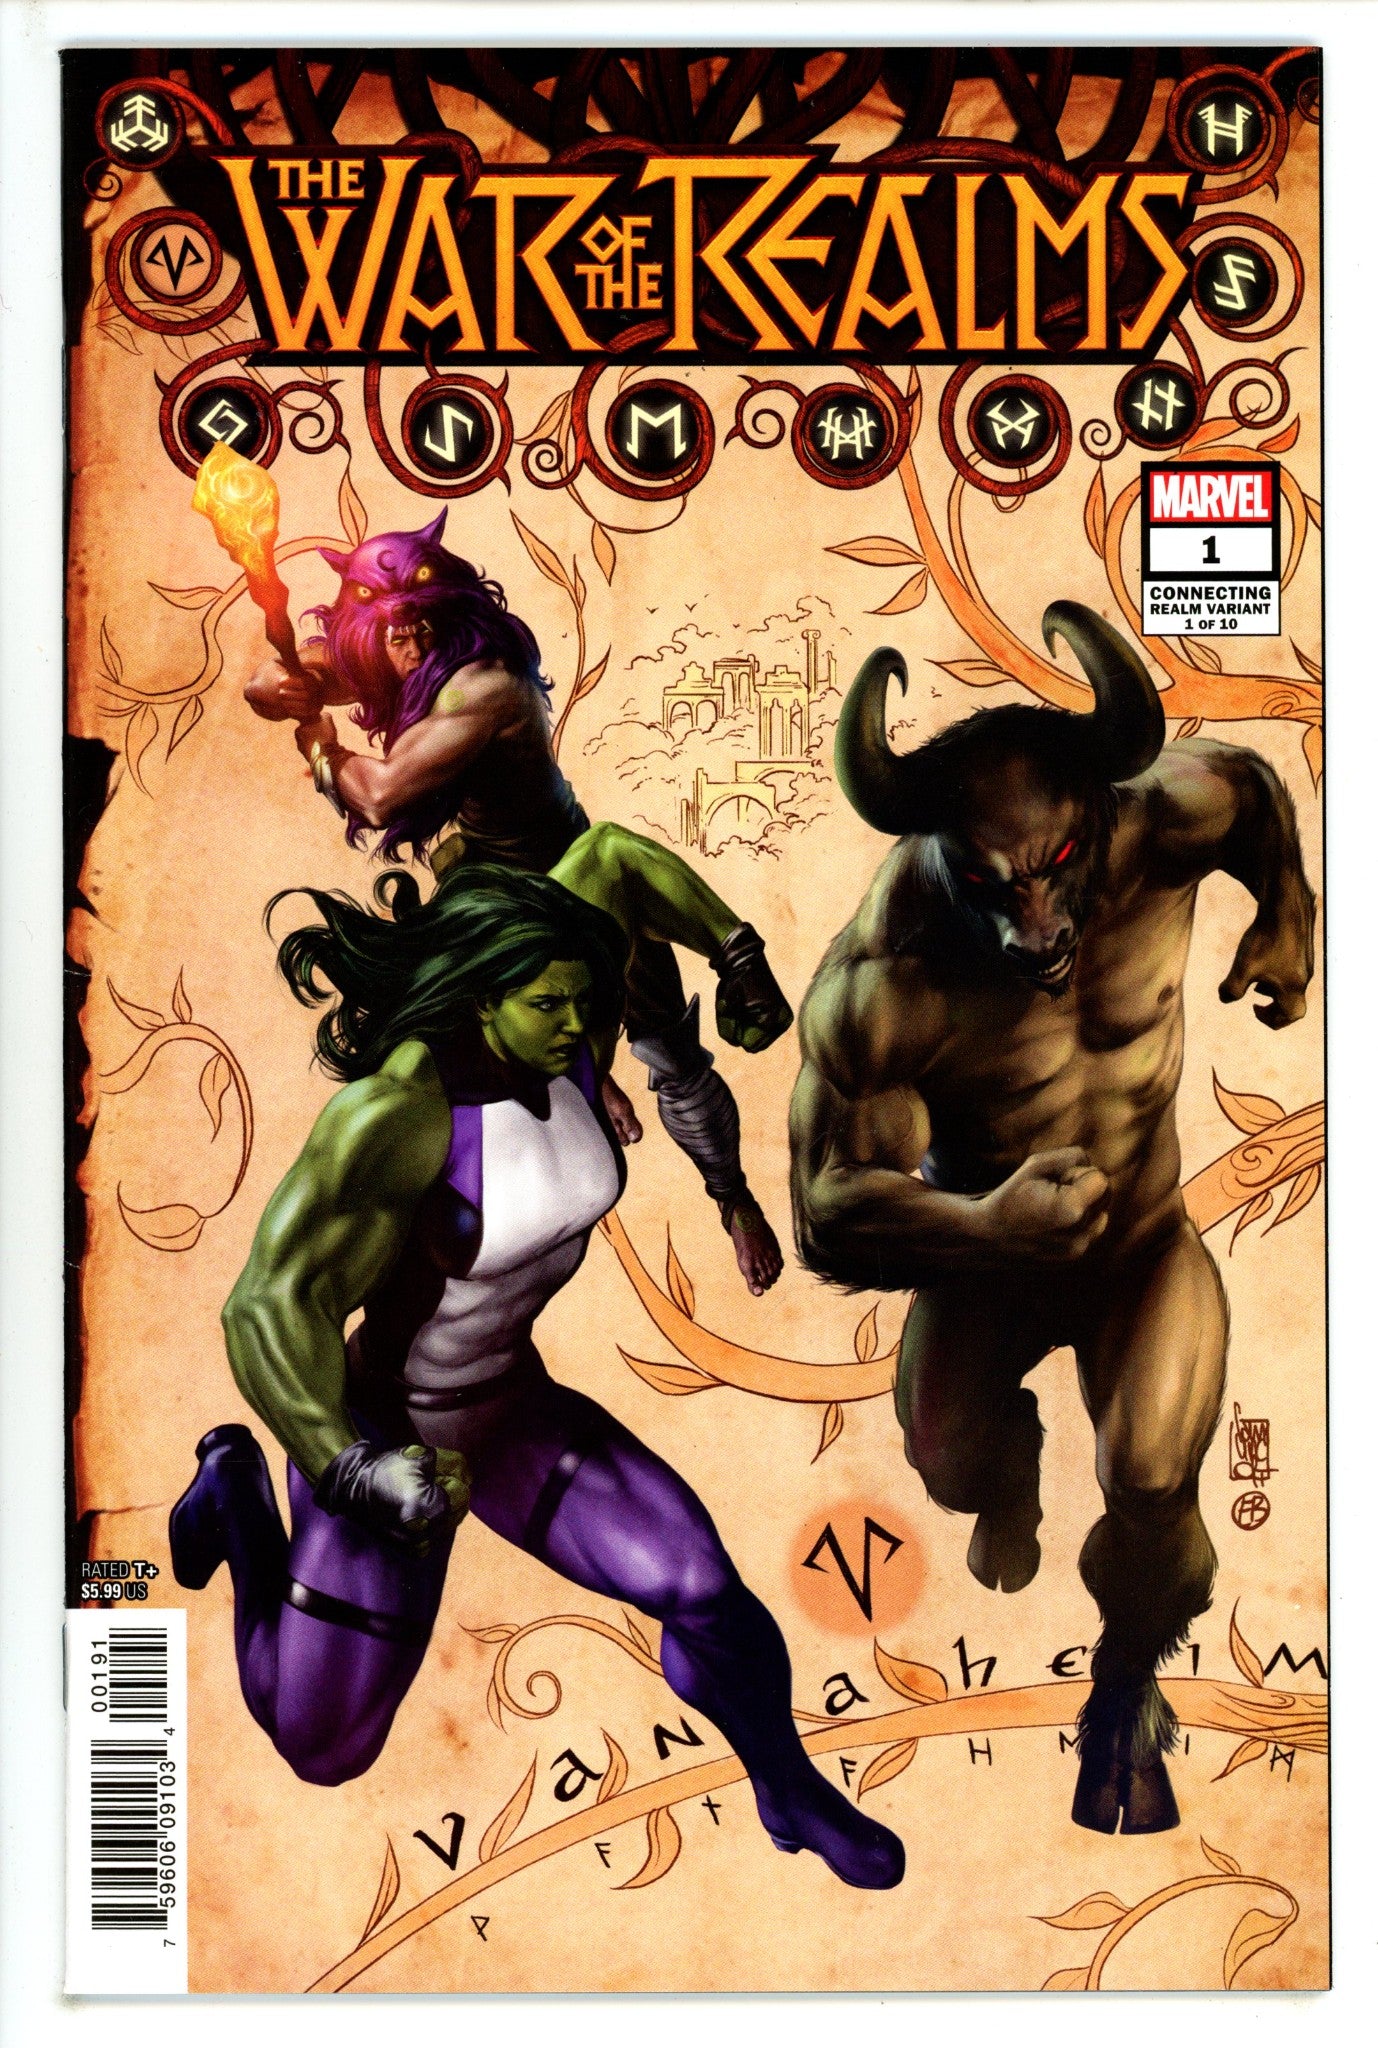 War of the Realms 1 Camuncoli Connecting Variant (2019)